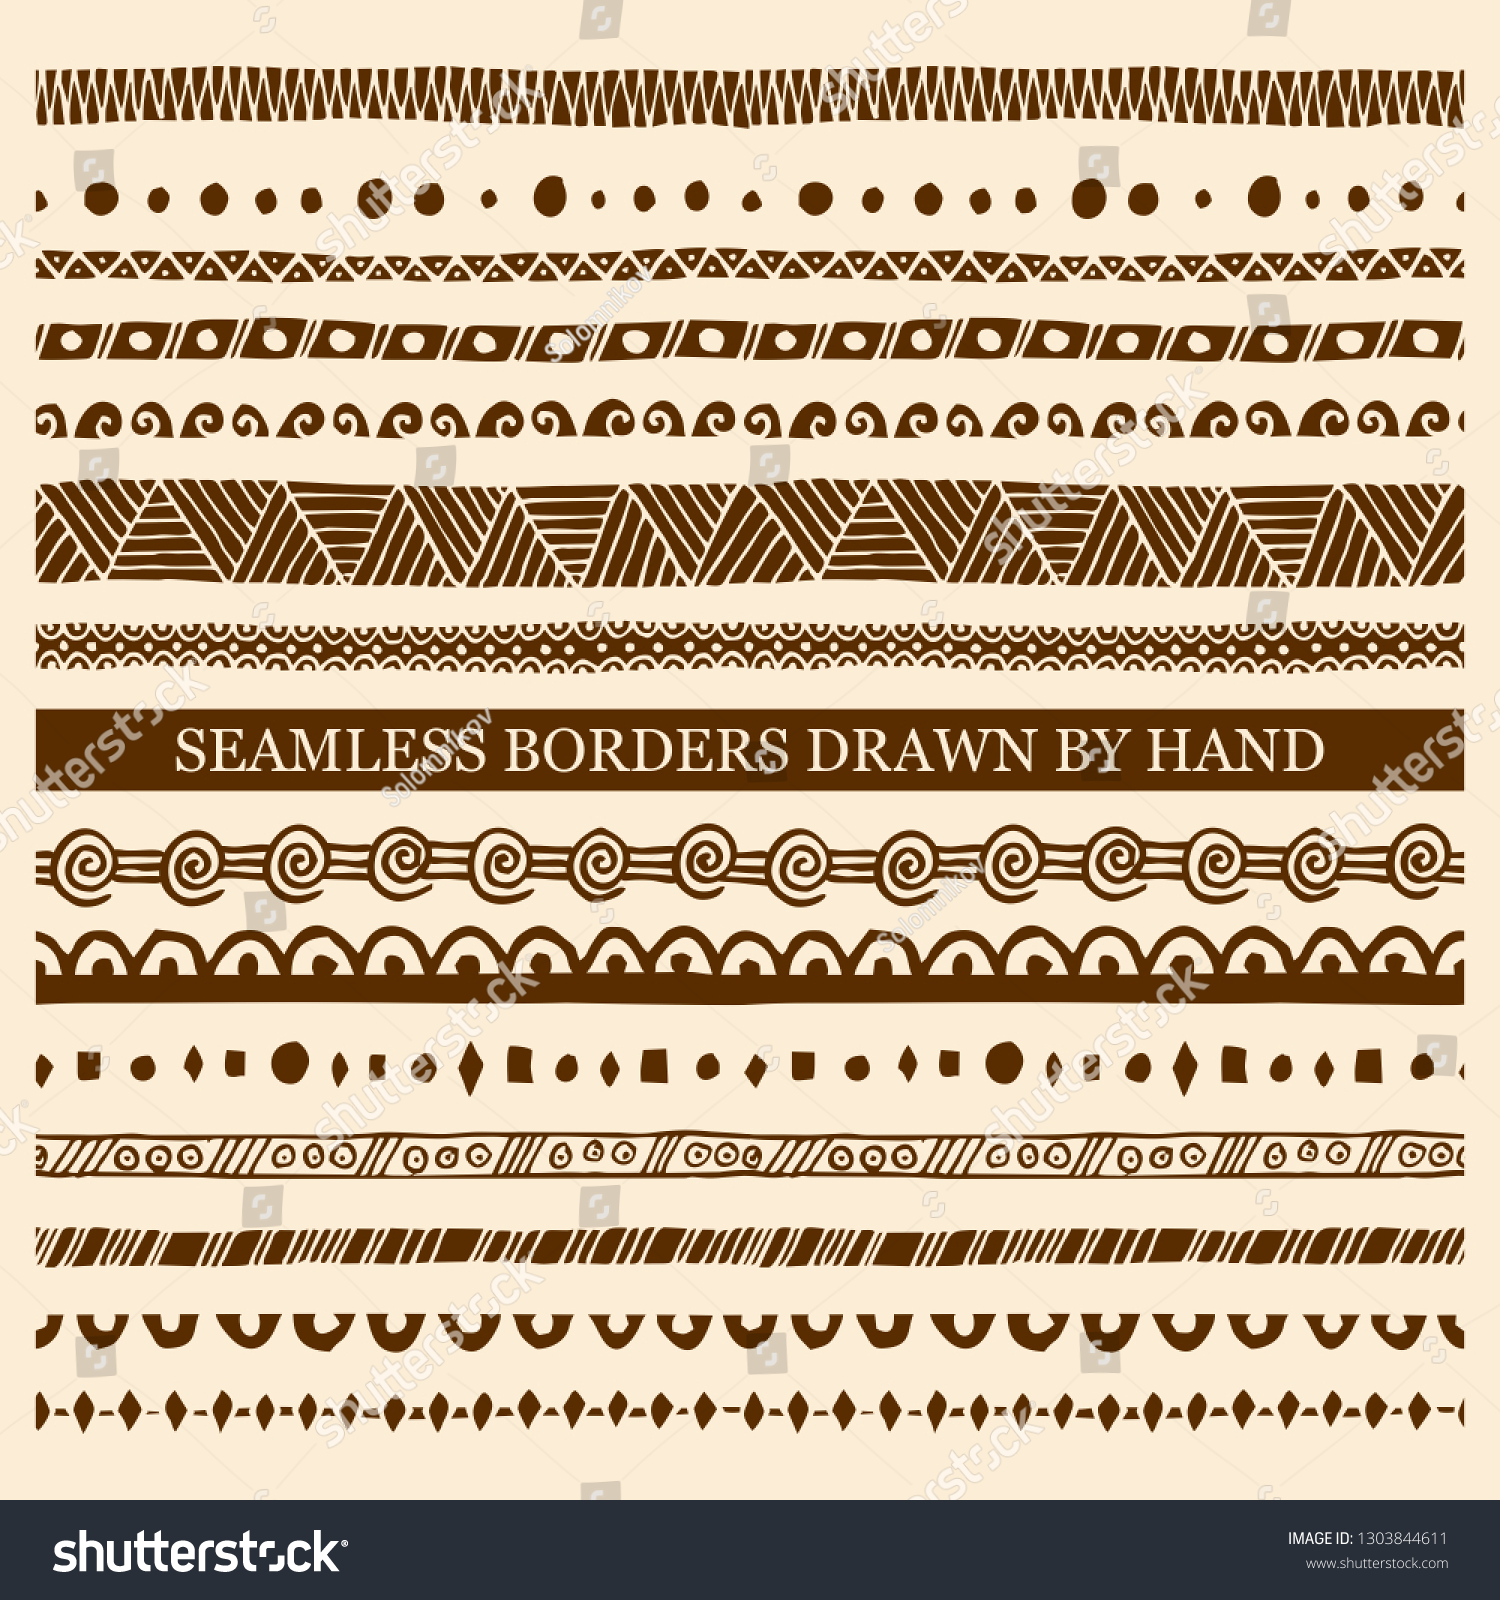 Vector set of hand drawn seamless borders made with ink. Freehand textures for fabric, polygraphy, web design. #1303844611